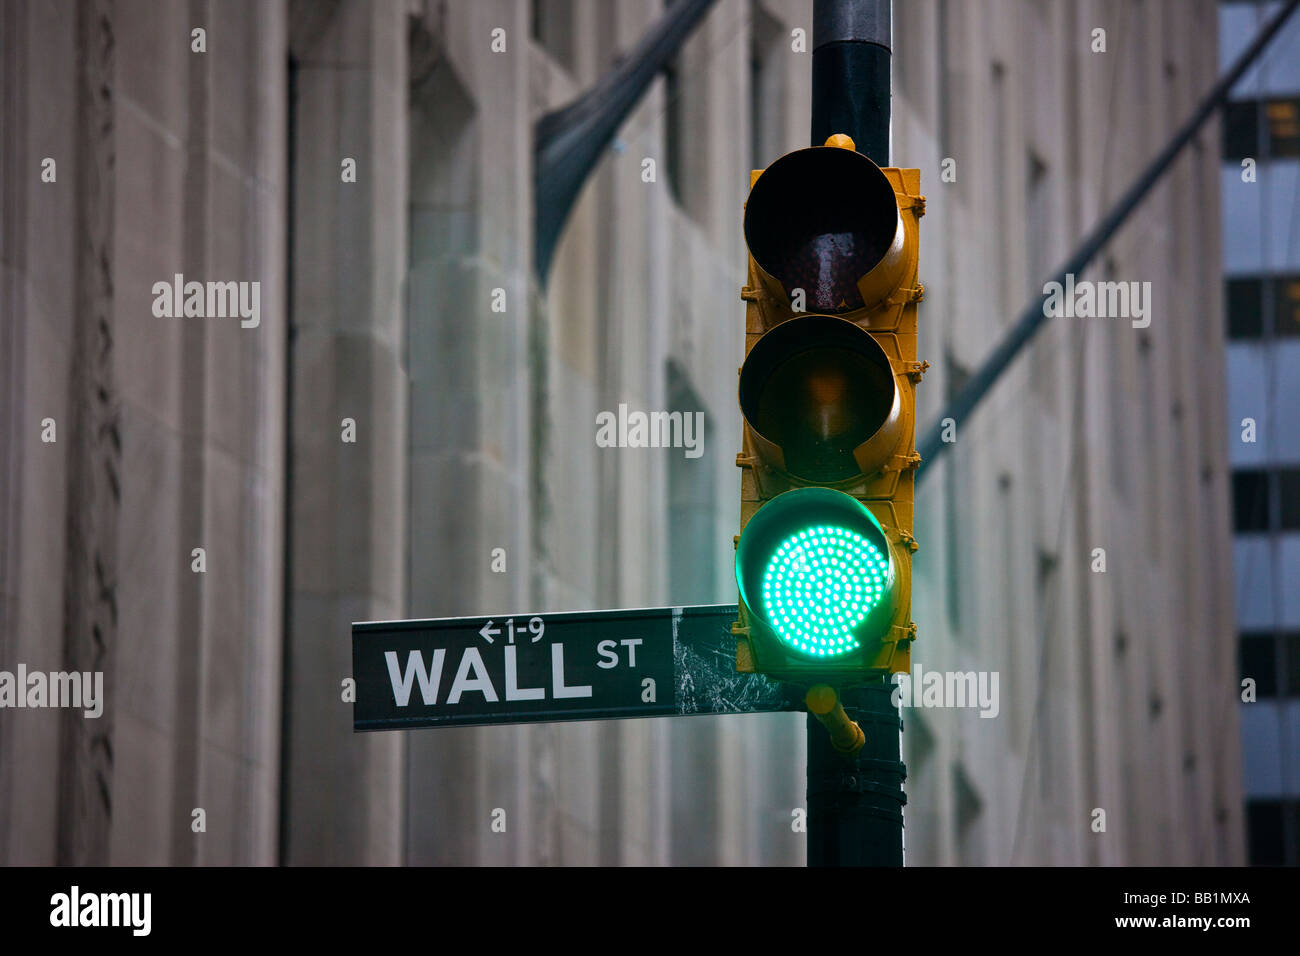 Wall Street Sign in New York City Stock Photo